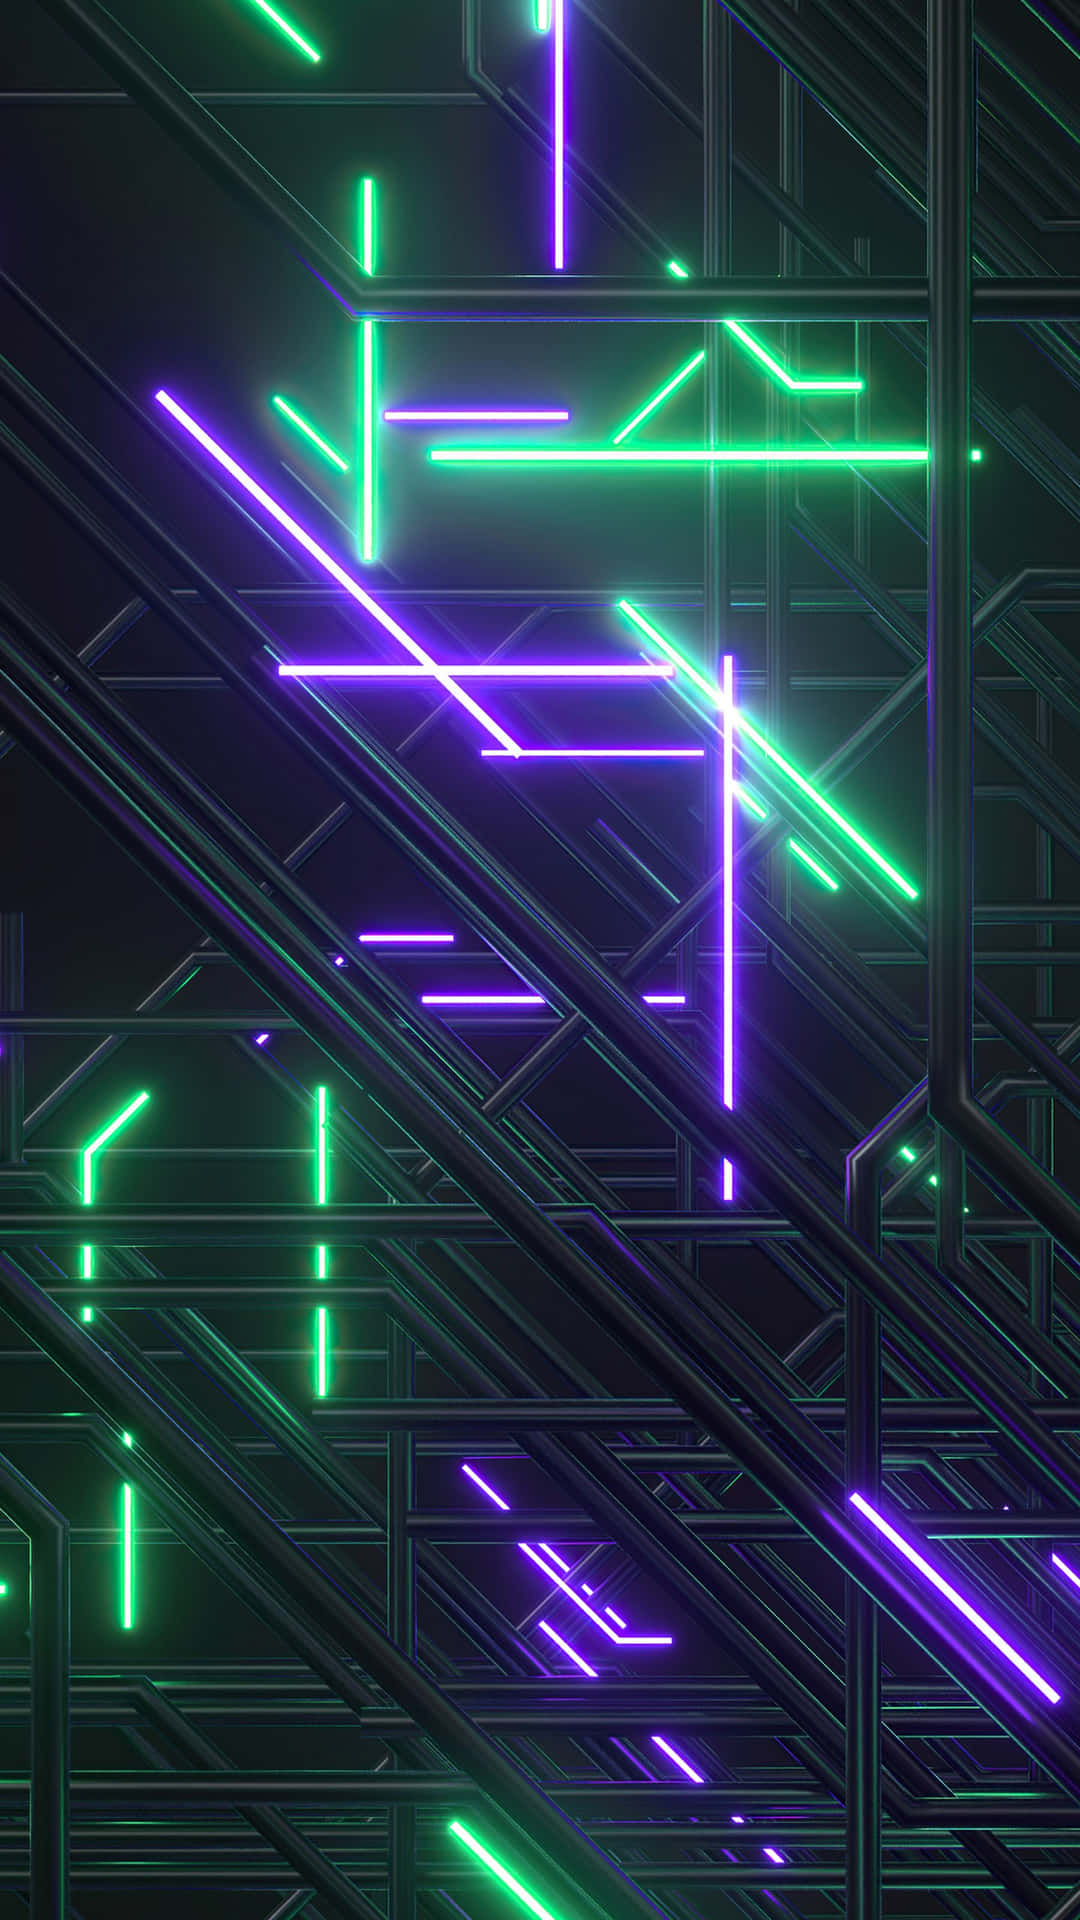 [100+] Neon Green And Purple Wallpapers | Wallpapers.com